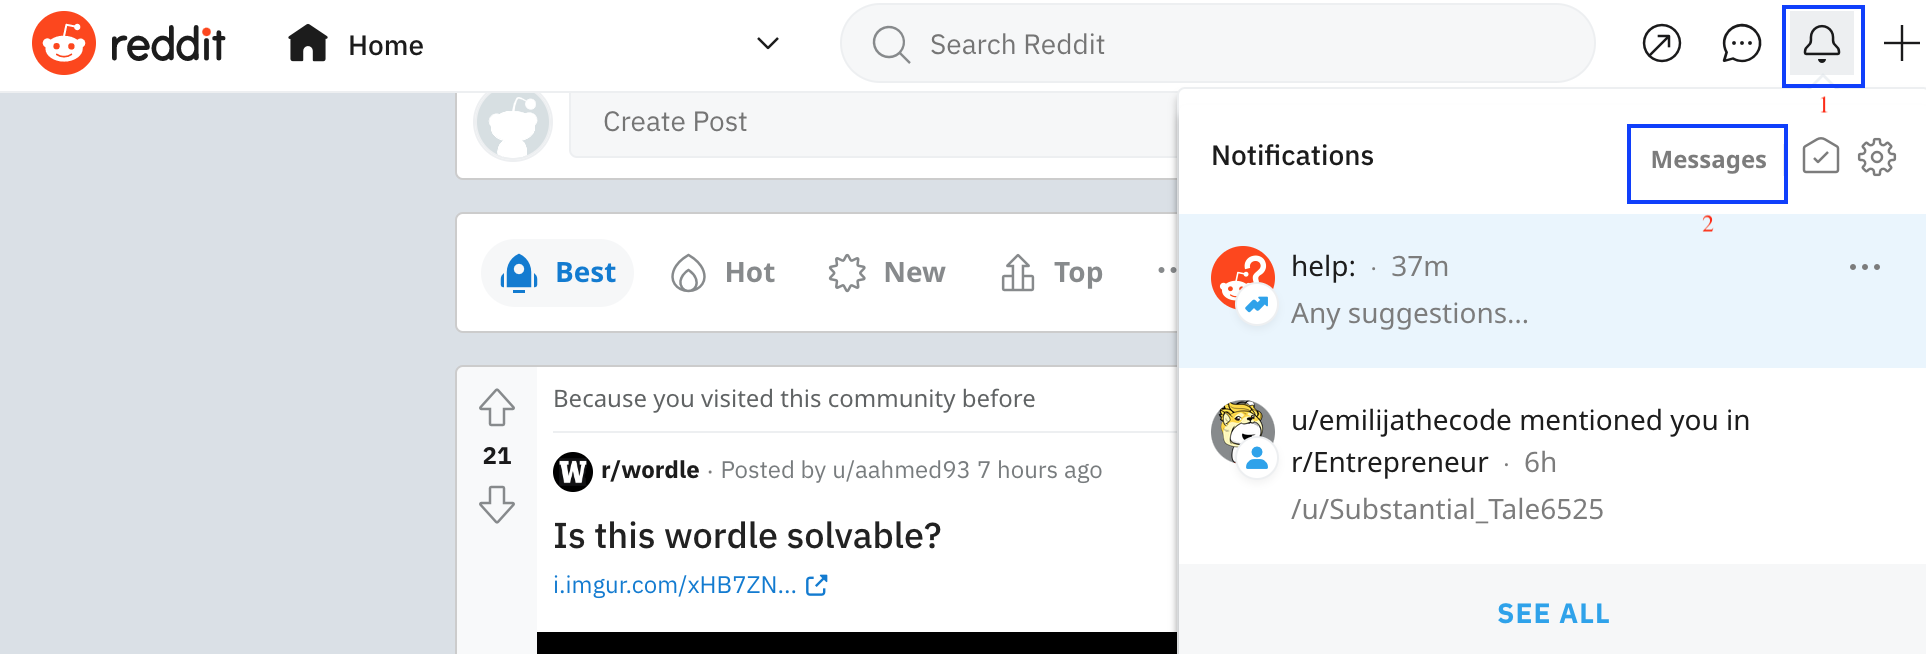 Ring icon and messages section on Reddit